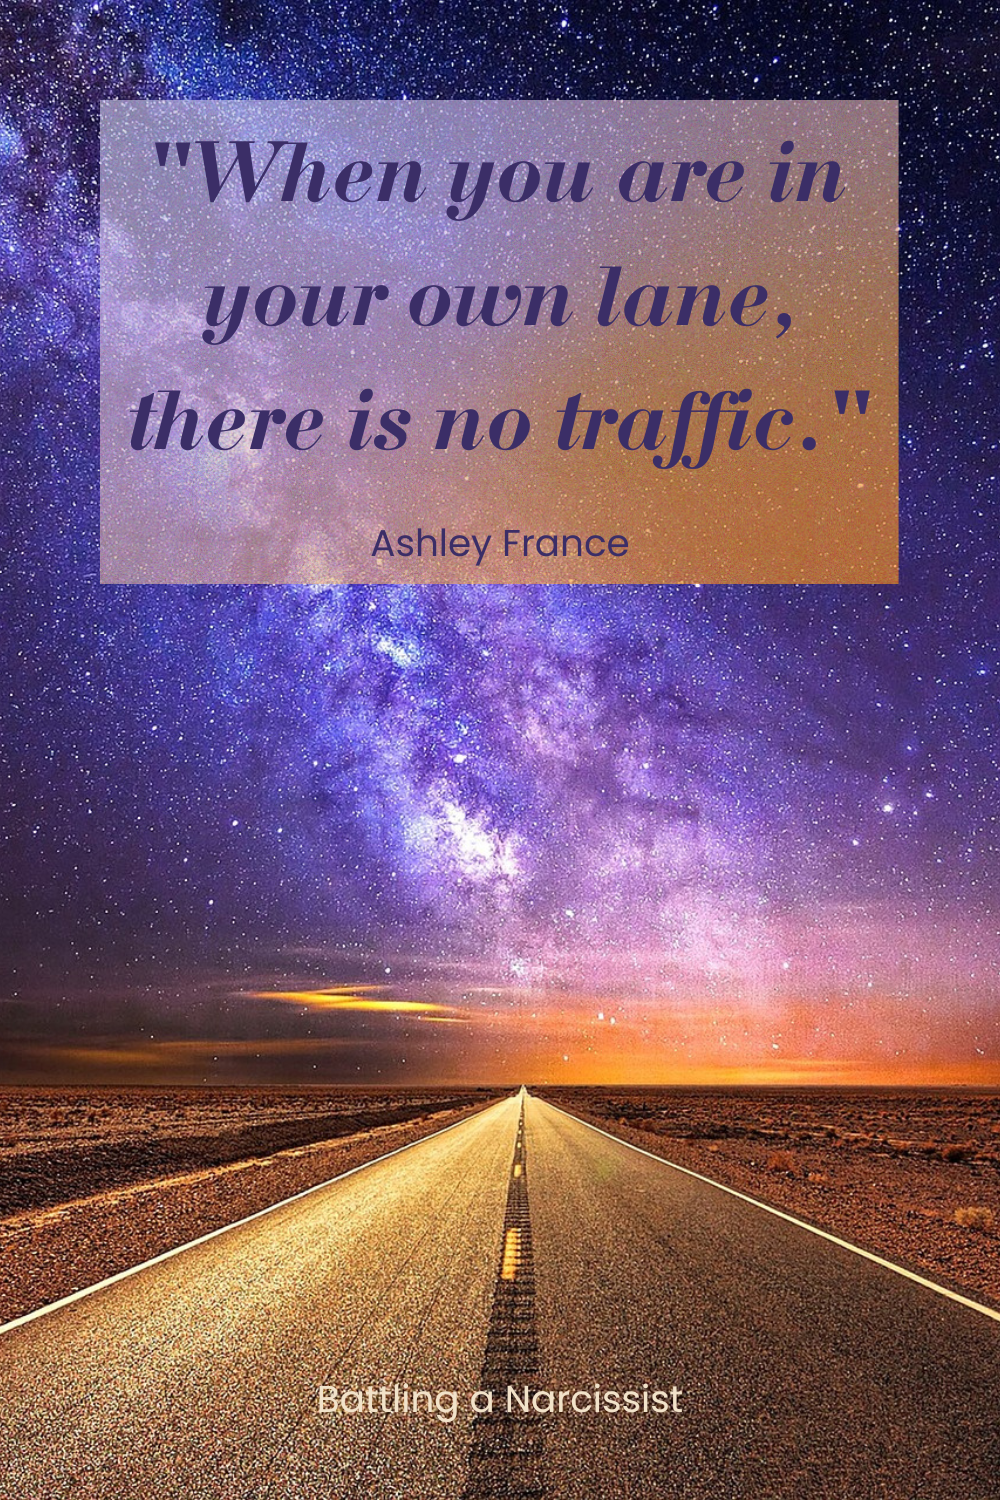 If you are in your own lane, there is no traffic.